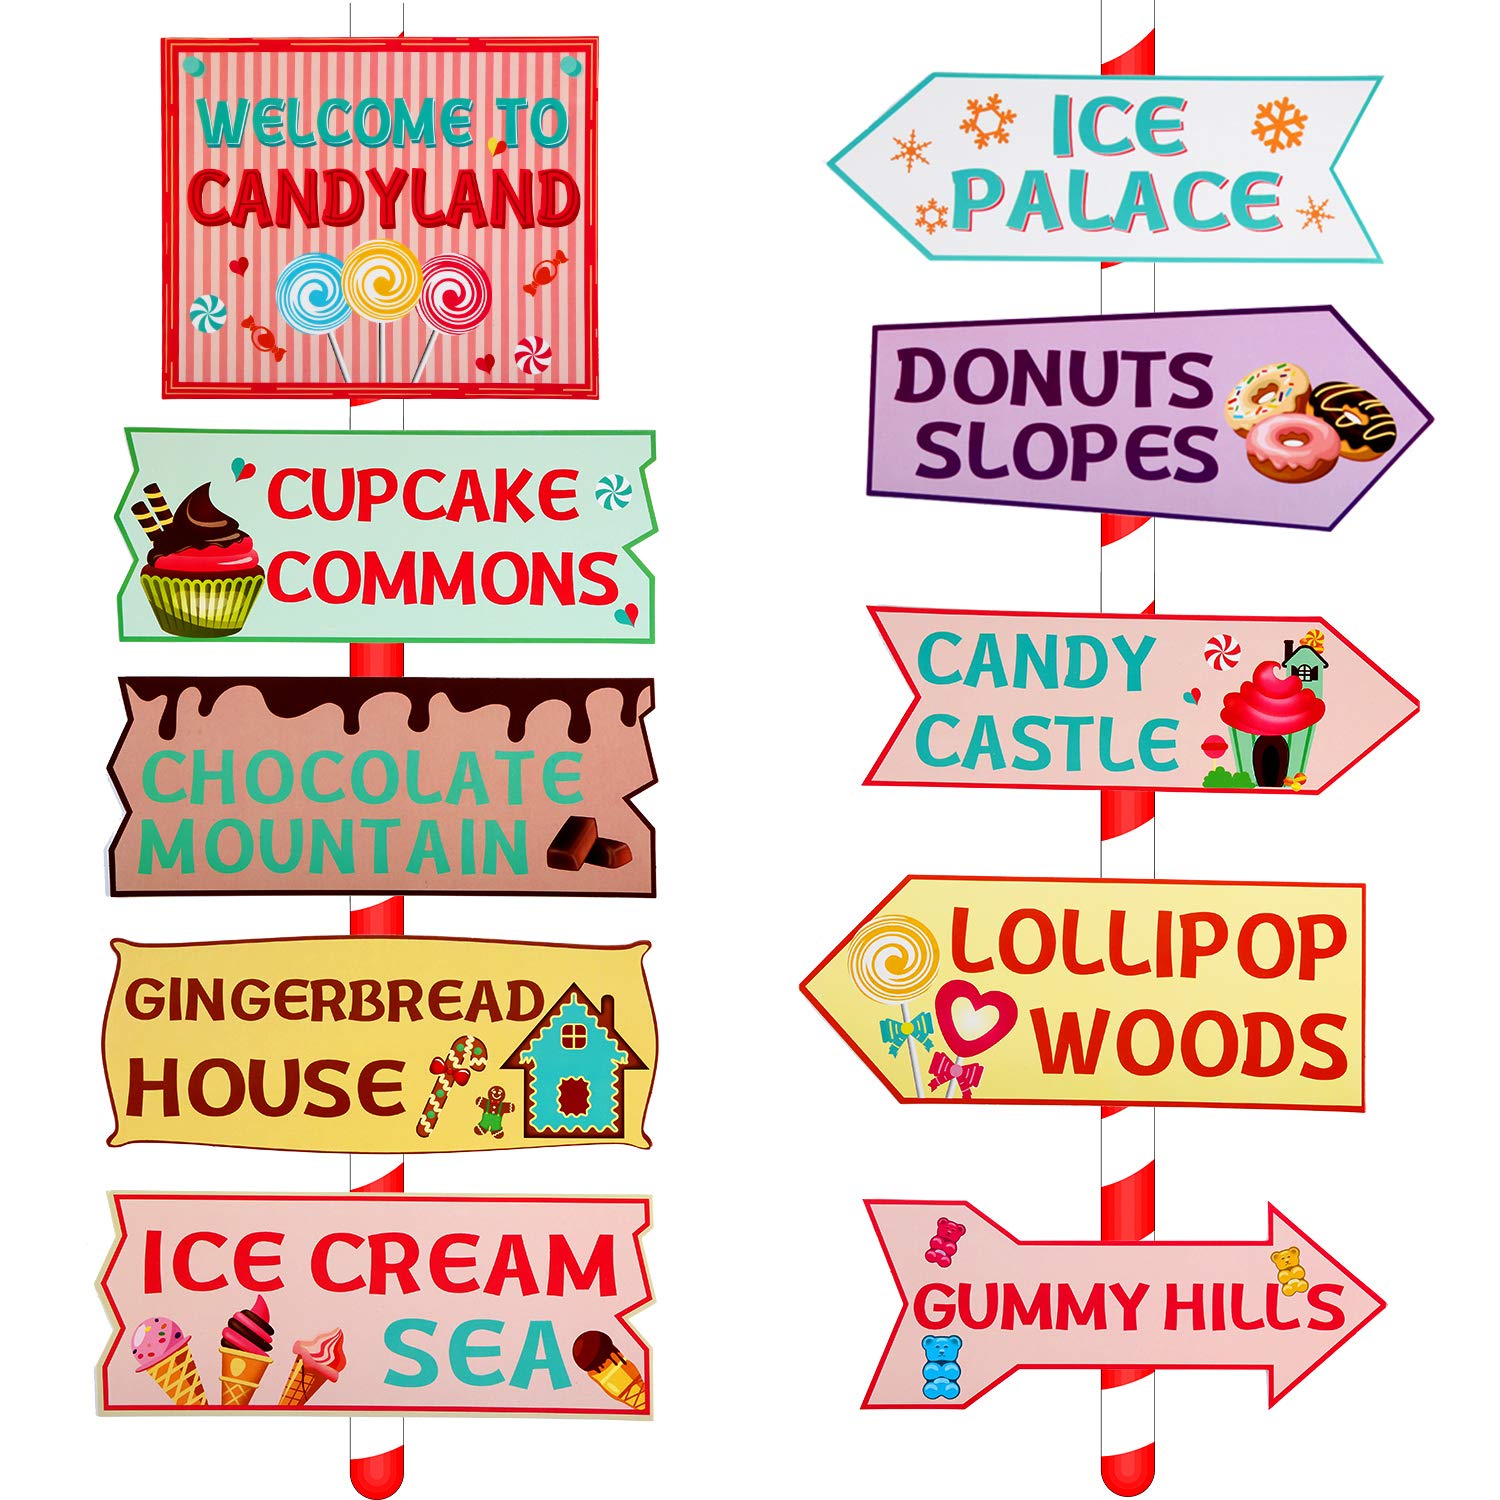 20 Pieces Candyland Party Decorations Candy Land Party Sign Candy Decor Welcome Candyland Birthday Party Decorations Directional Signs Street Photo Prop Cutouts for Sweet Candy Theme Party Supplies